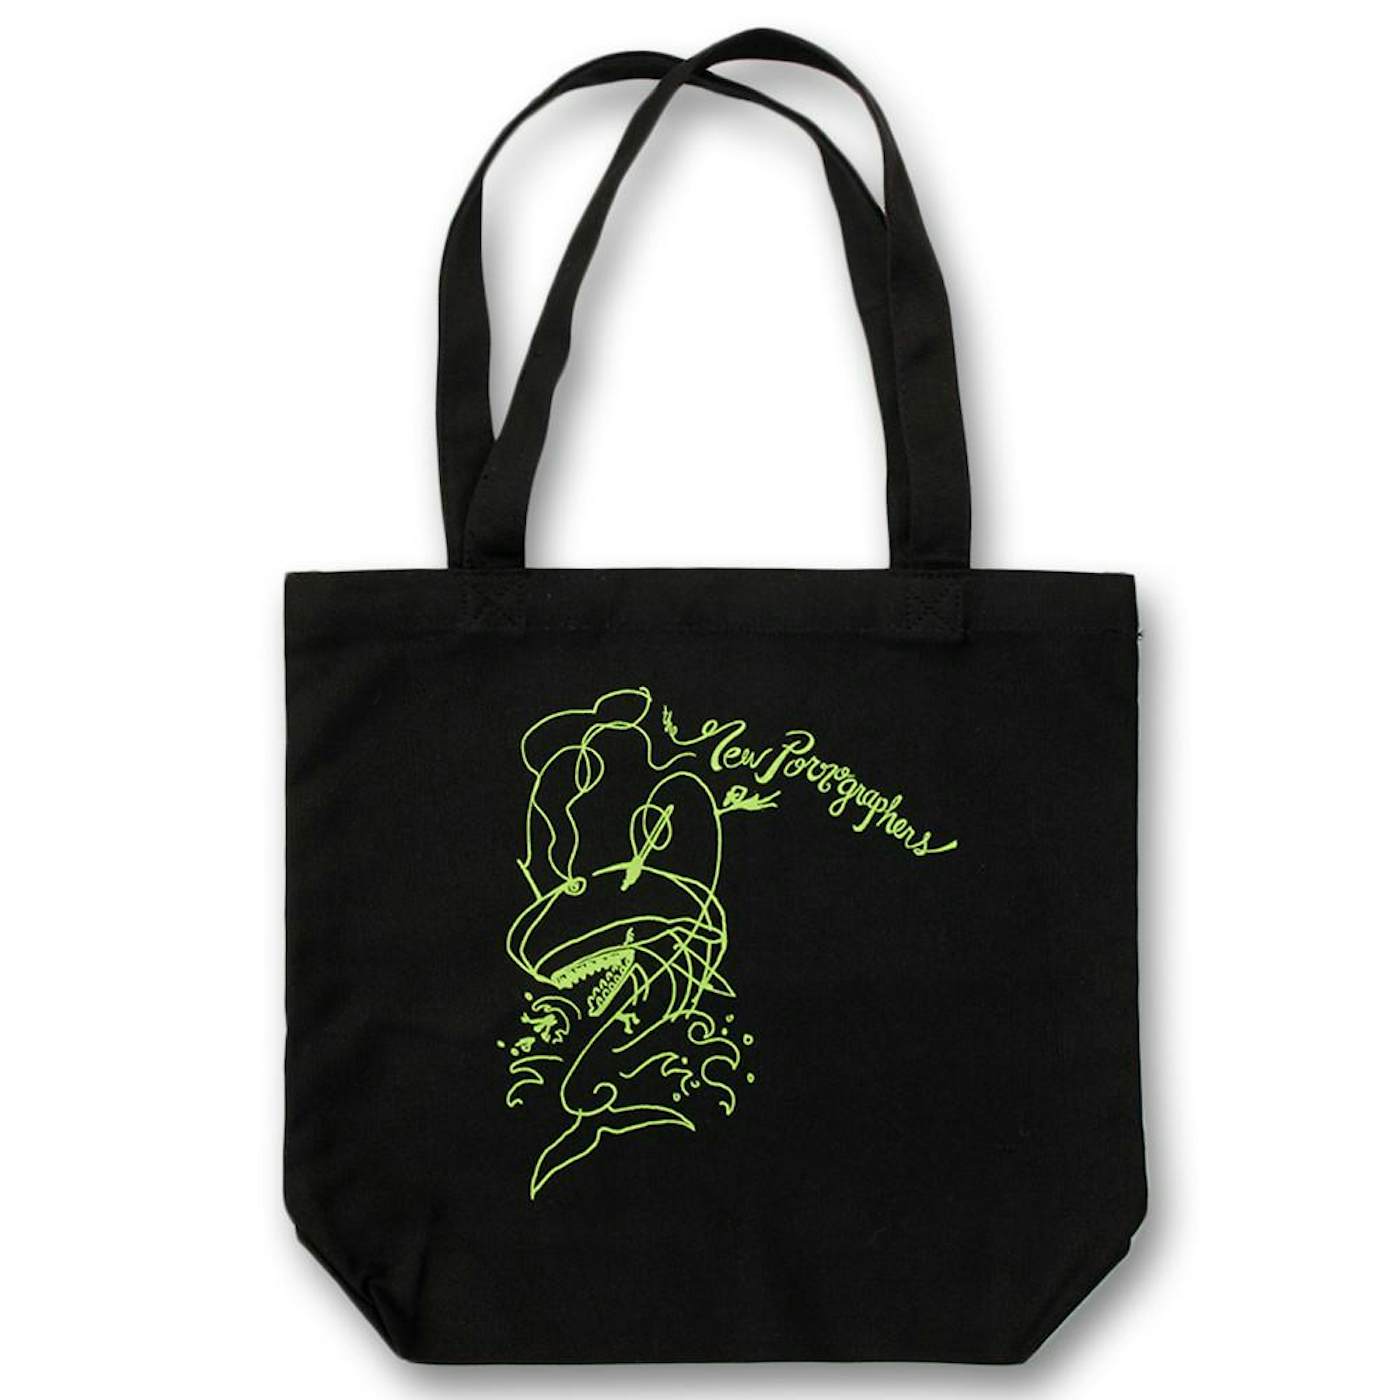 The New Pornographers Whale Tote Bag